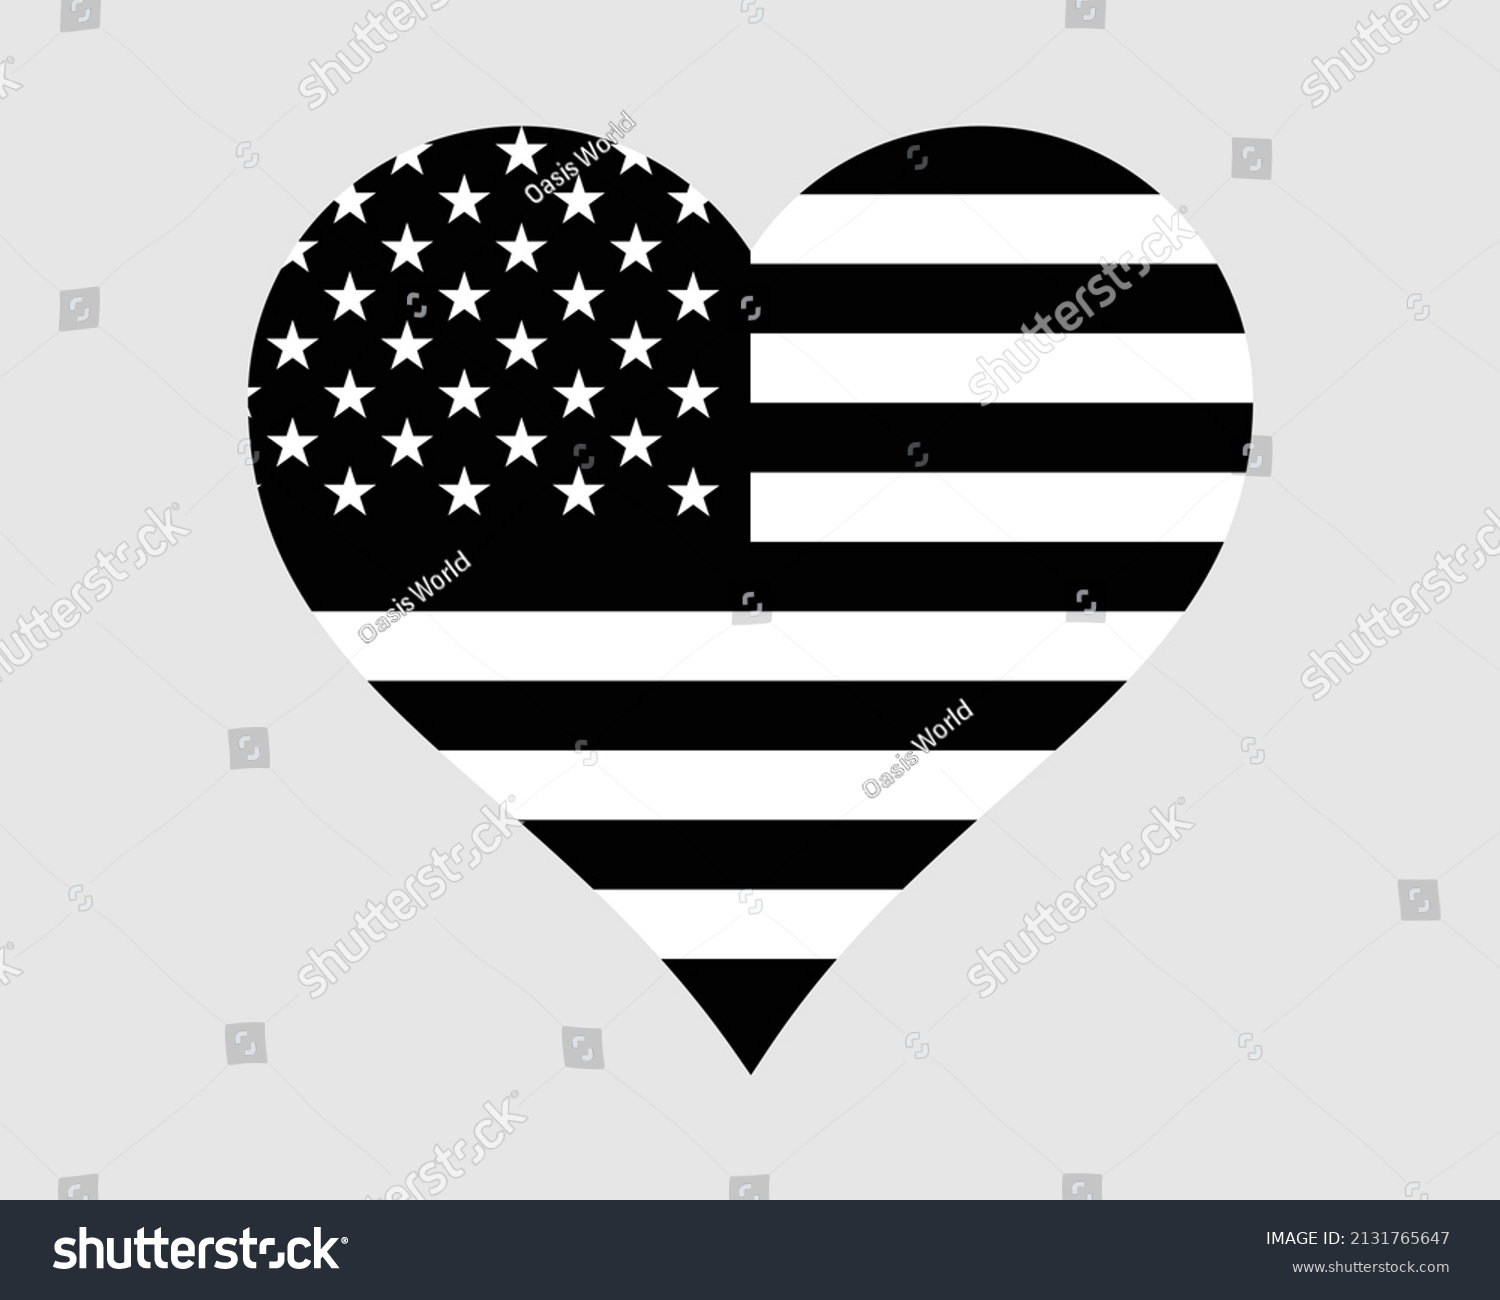 SVG of USA Black and White Heart Flag. US Love Shape Country Nation National Flag. United Stated of America Dark Banner Icon Sign Symbol. EPS Vector Illustration. svg